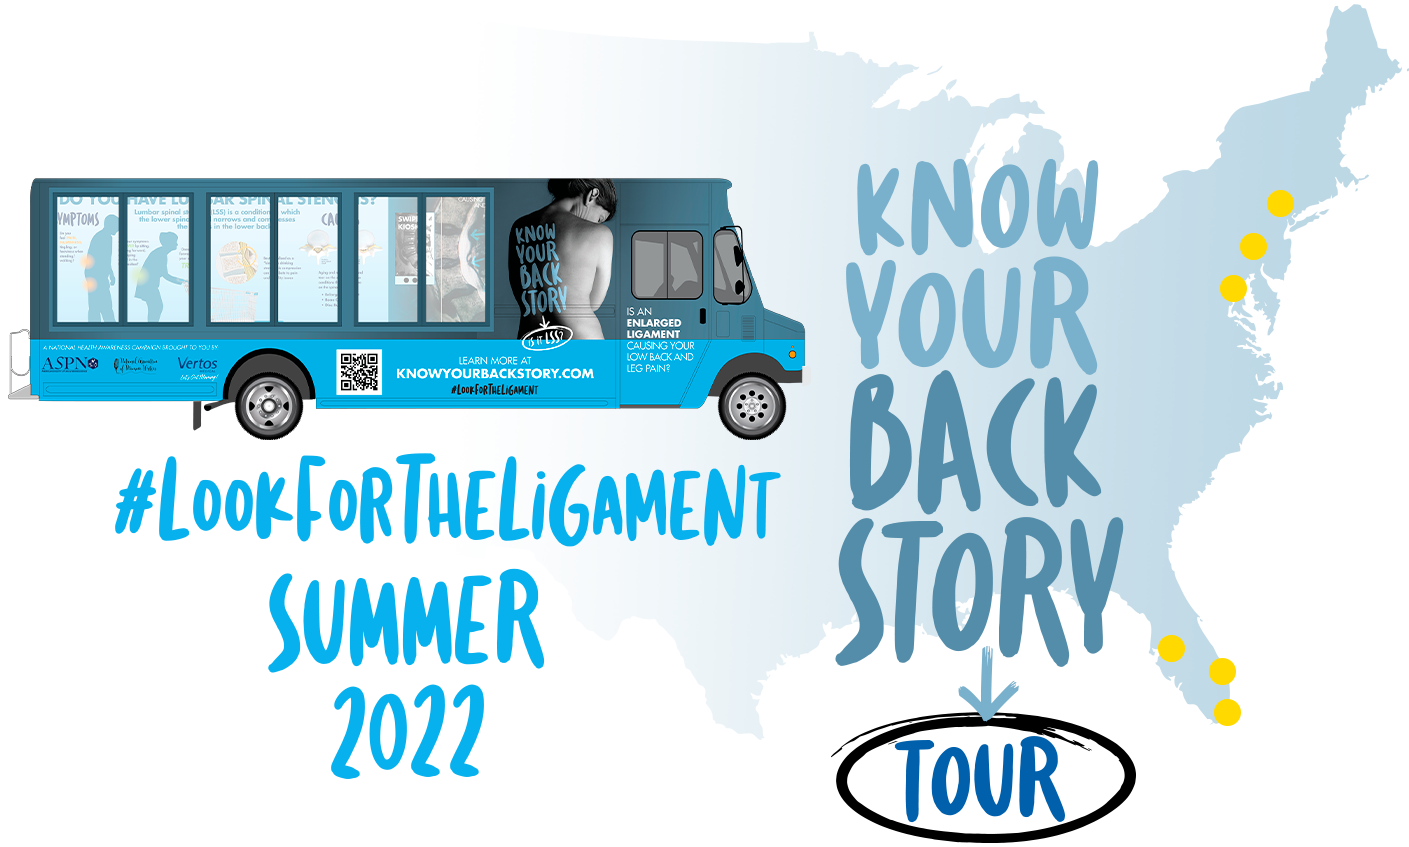 #LookForTheLigament Summer 2022. Know Your Back Story Tour